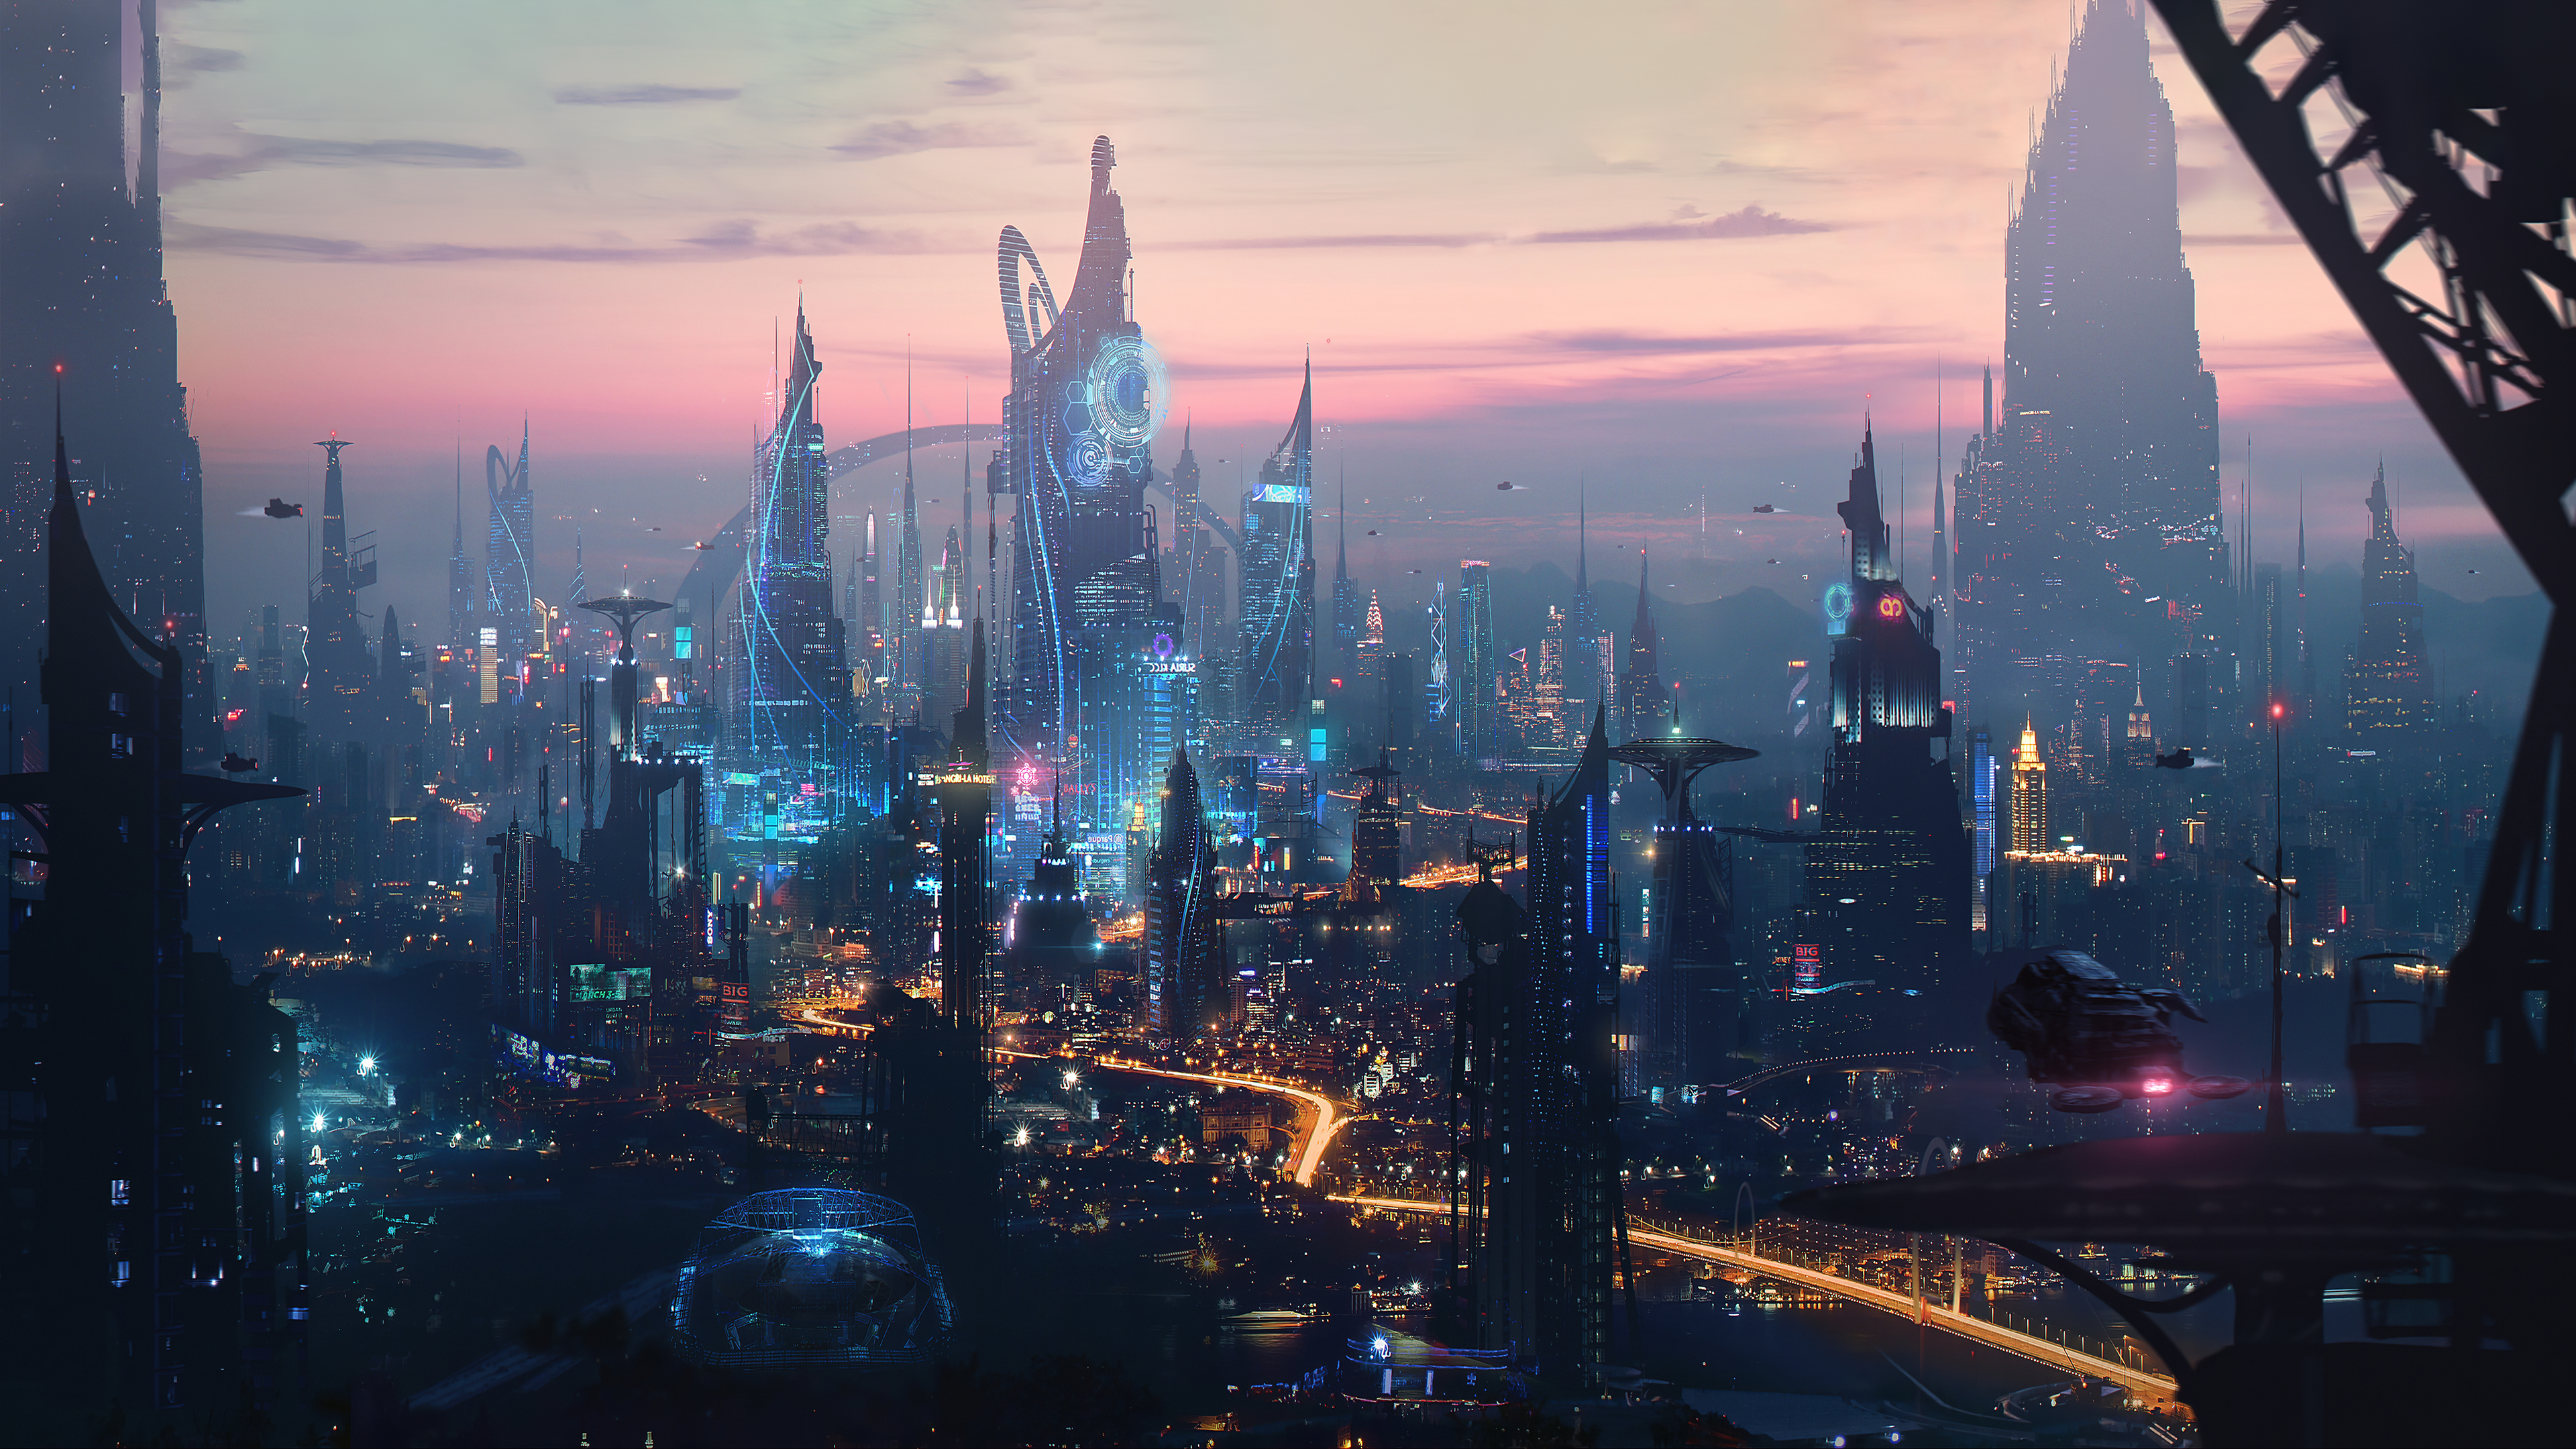 Sci Fi City Wallpapers